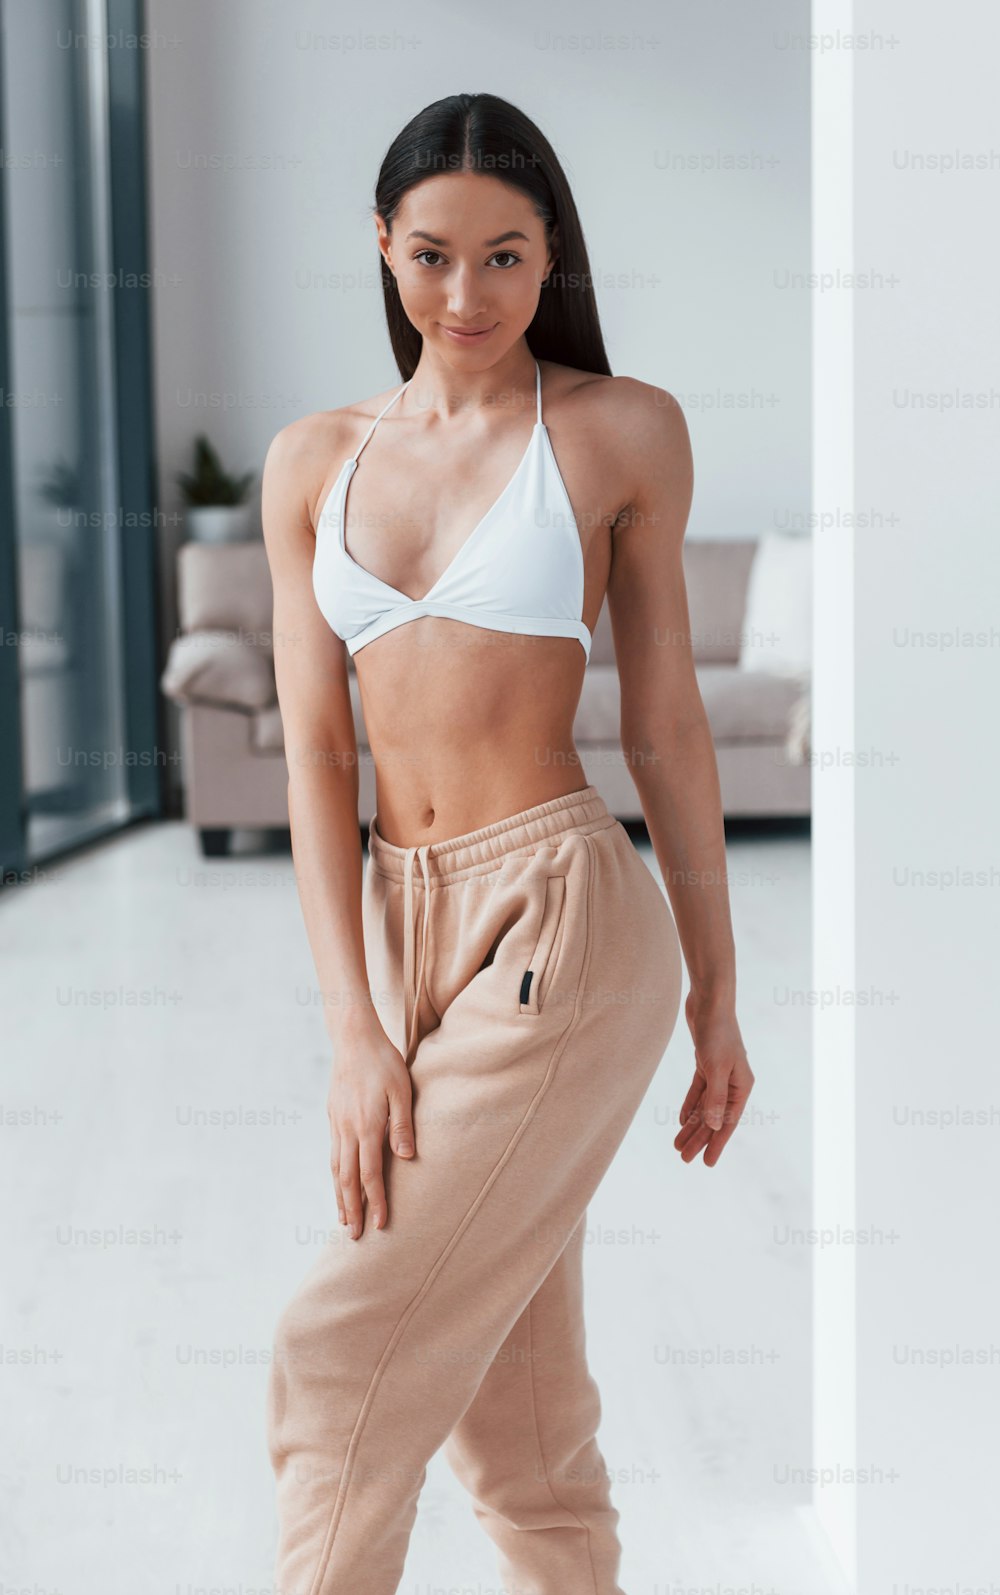 Slender woman in white underwear standing indoors in room at daytime.